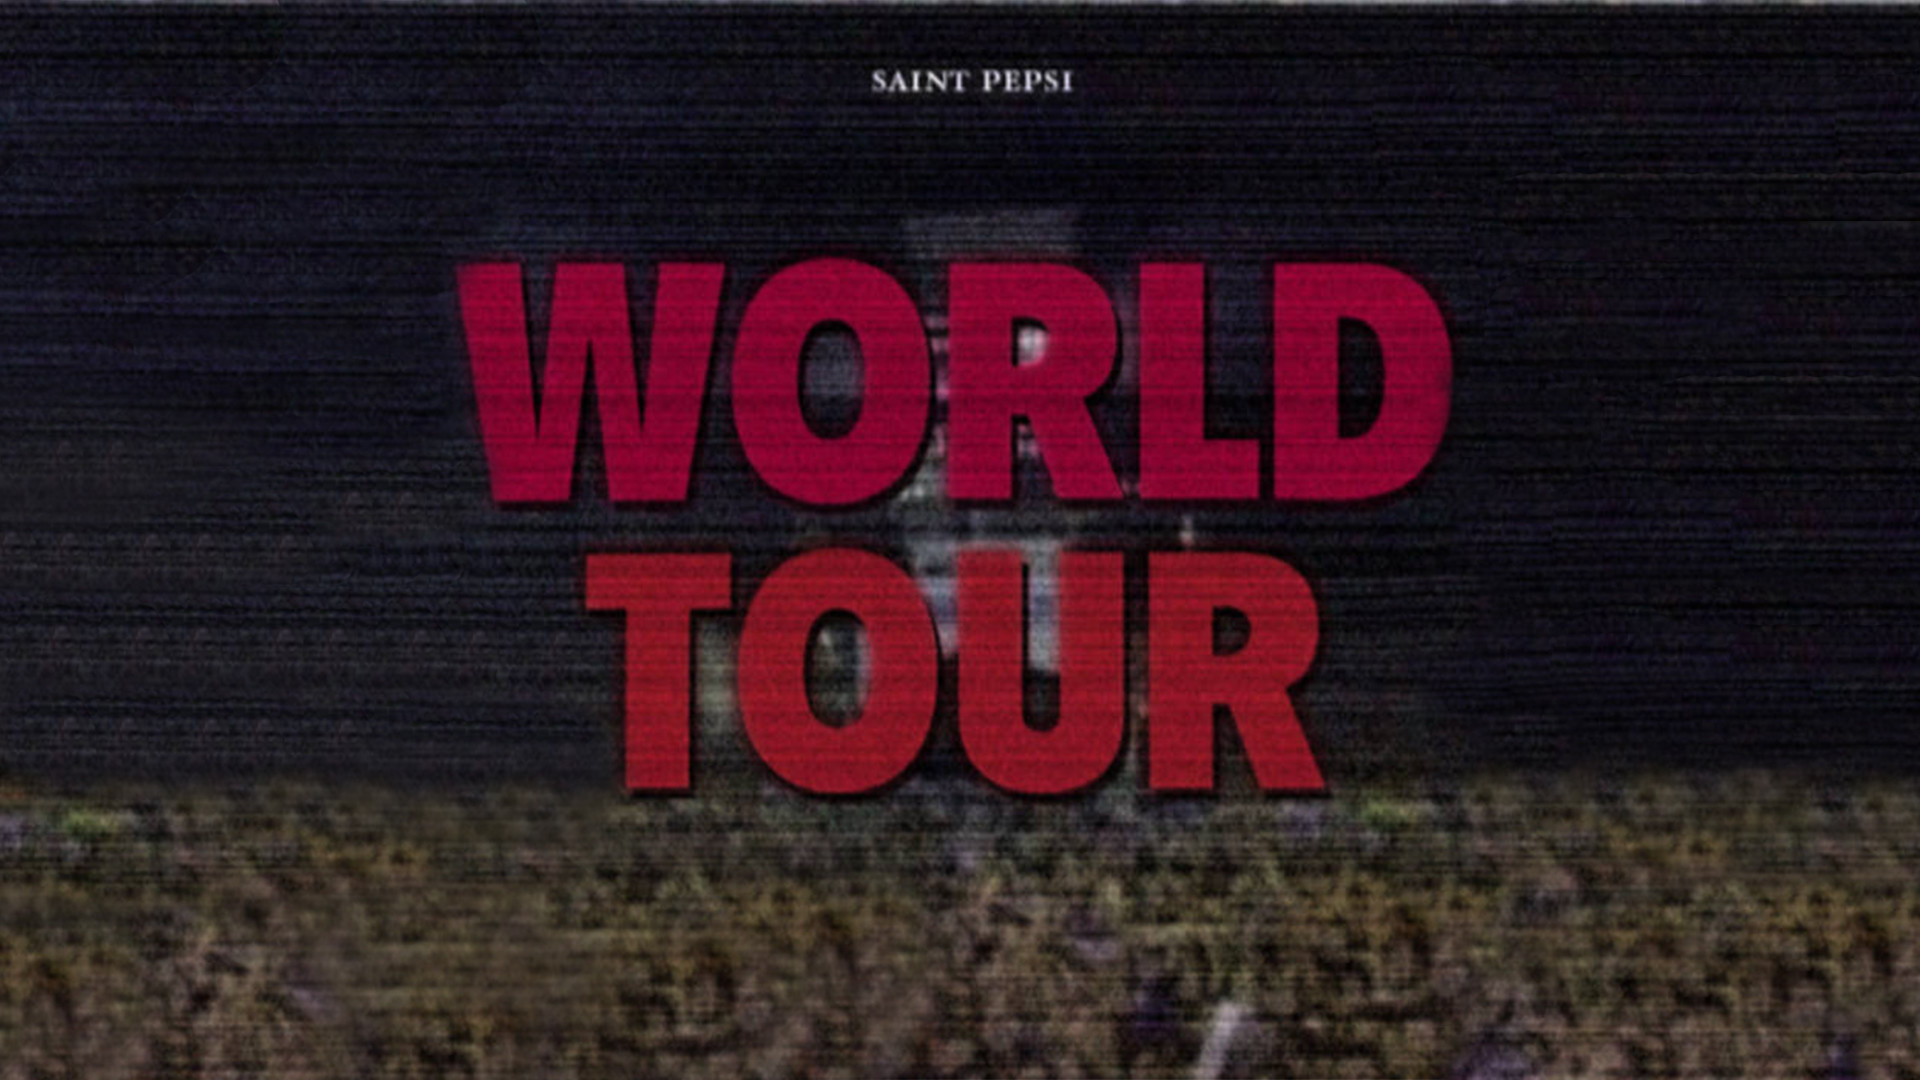 1920x1080 Here's a 1920 x 1080 wallpaper of Saint Pepsi's World Tour. Have any other  suggestions?